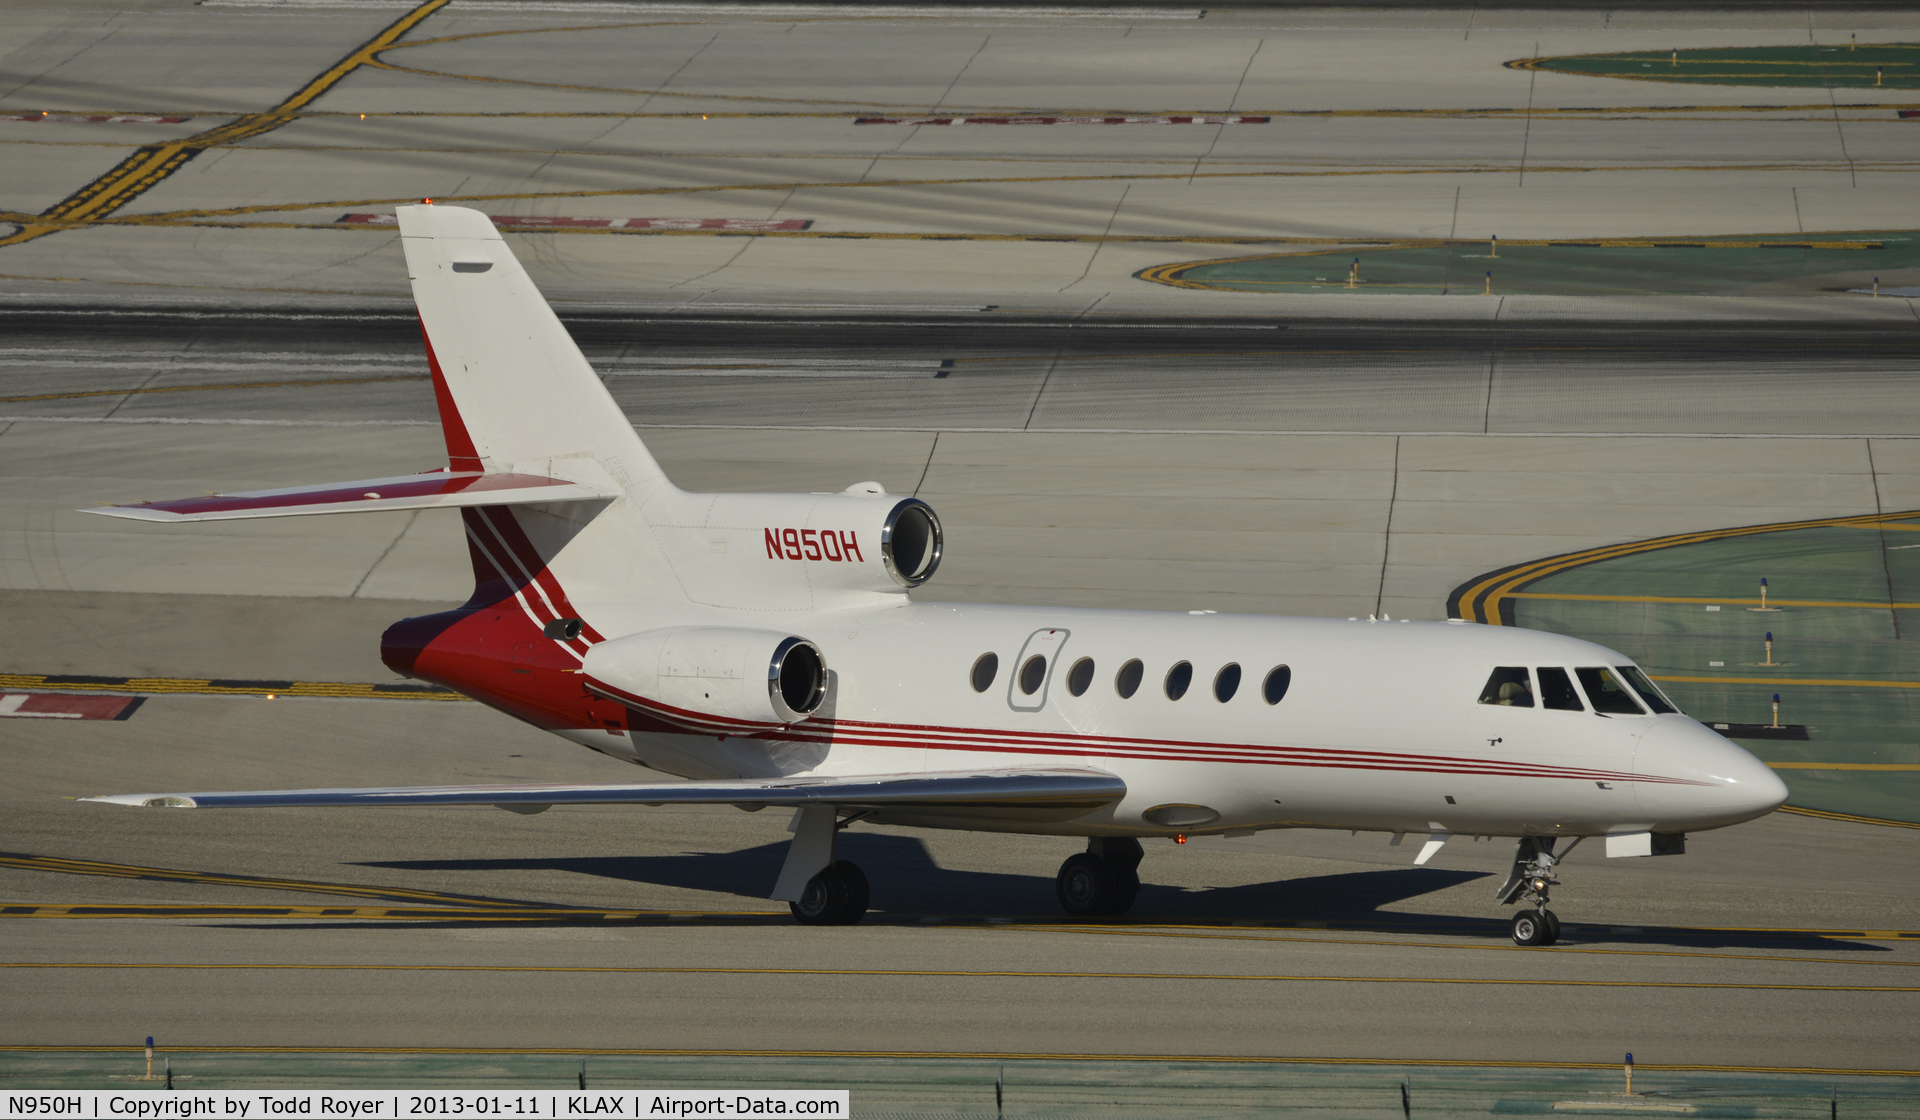 N950H, 2000 Dassault Mystere Falcon 50 C/N 307, Taxiing to parking at LAX